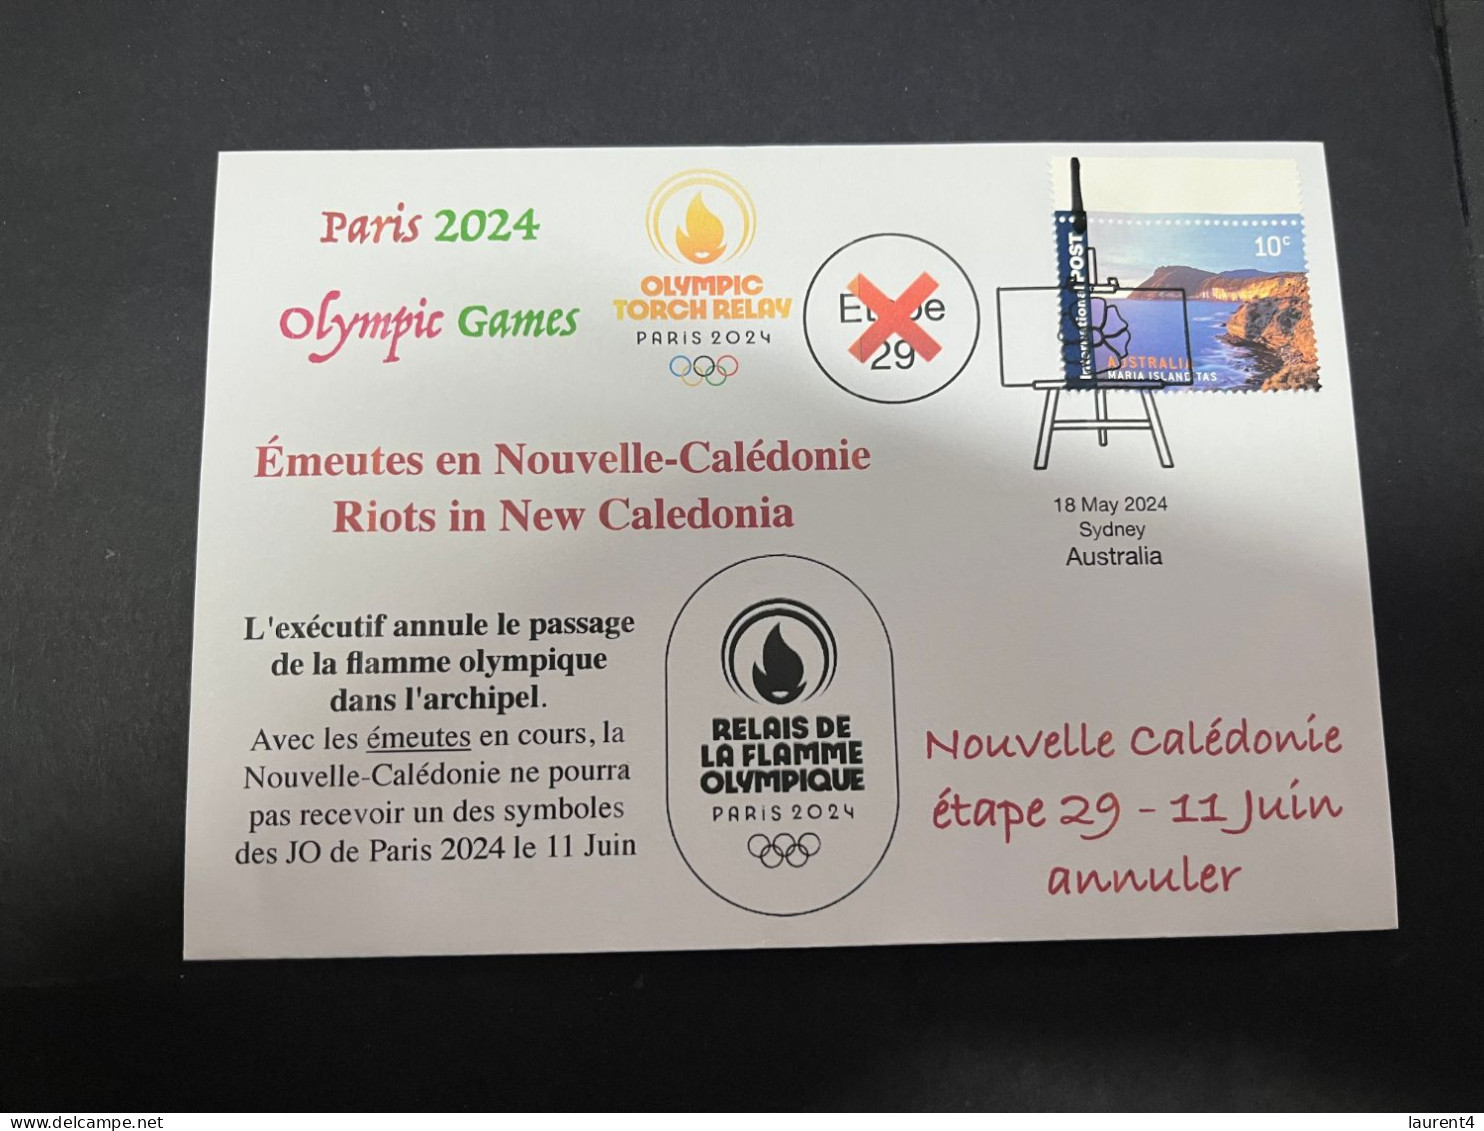 19-5-2024 (5 Z 27) (émeute) Riot In New Caledonia - The Paris Olympic Flame Will NOT Travel To New Caledonia On 11 June - Summer 2024: Paris